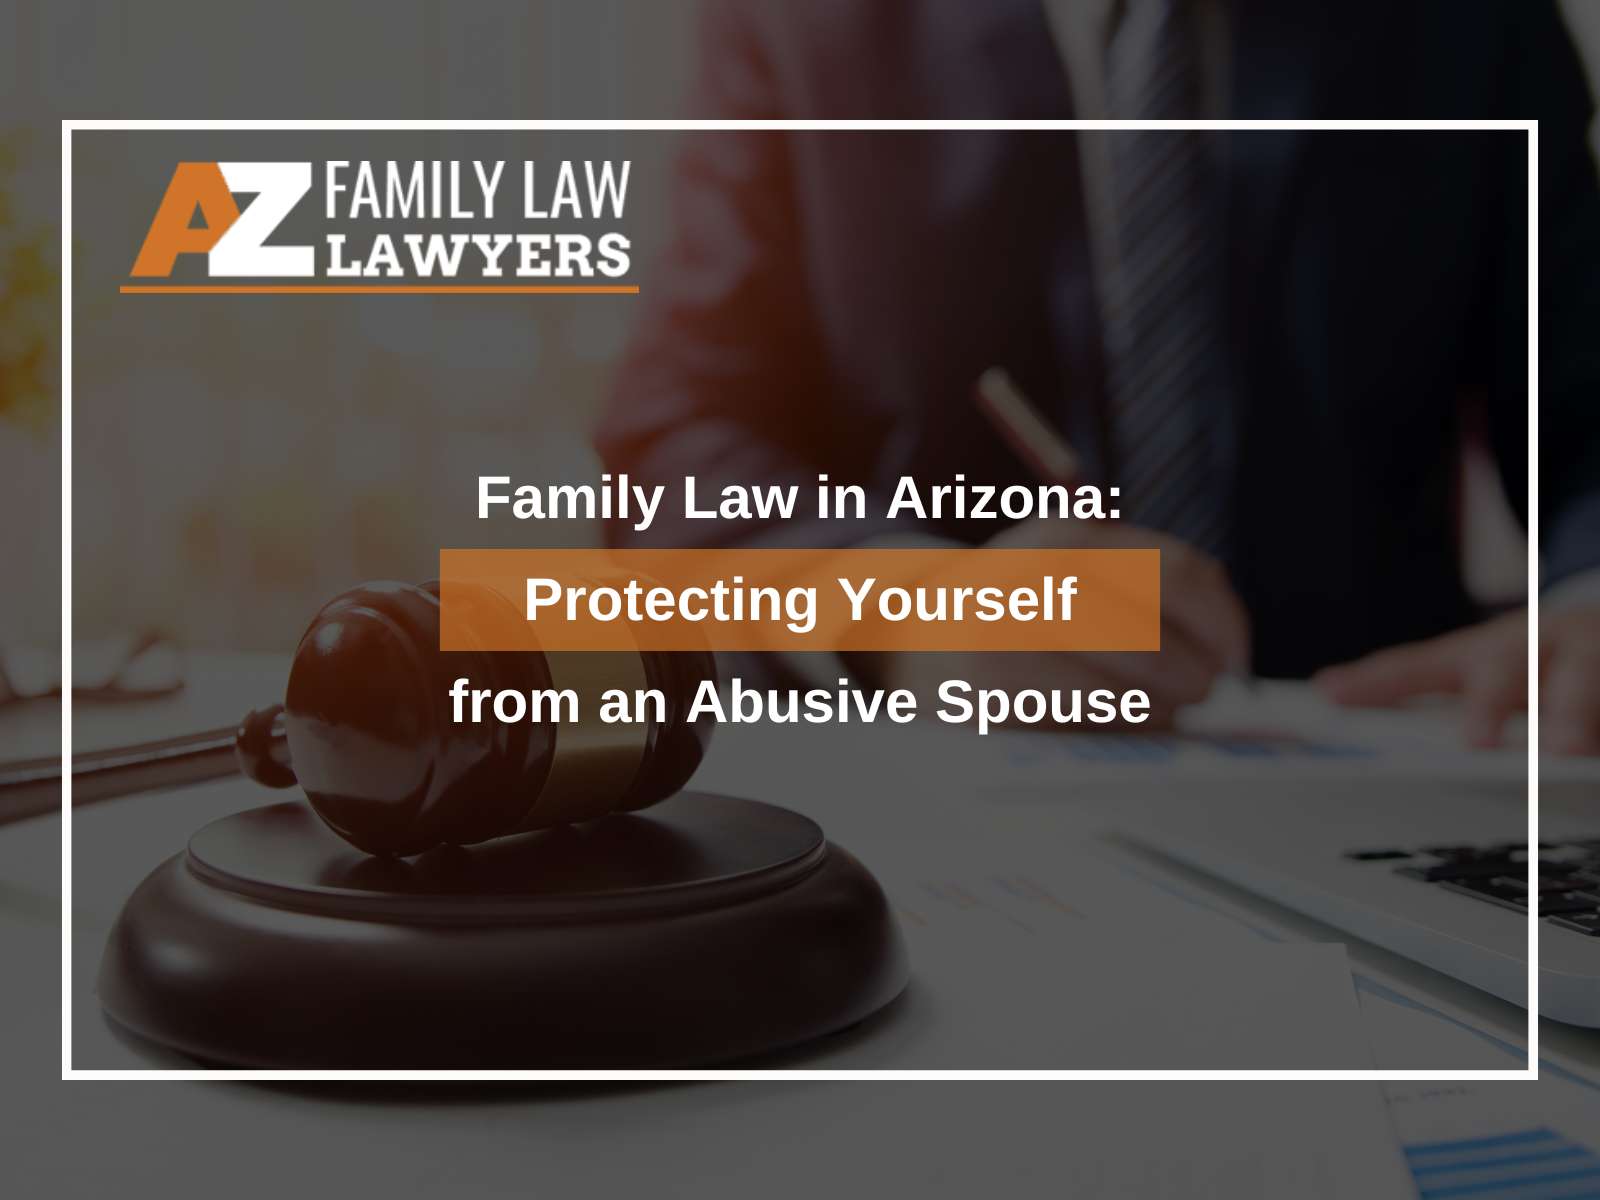 Family Law in Arizona: Protecting Yourself from an Abusive Spouse